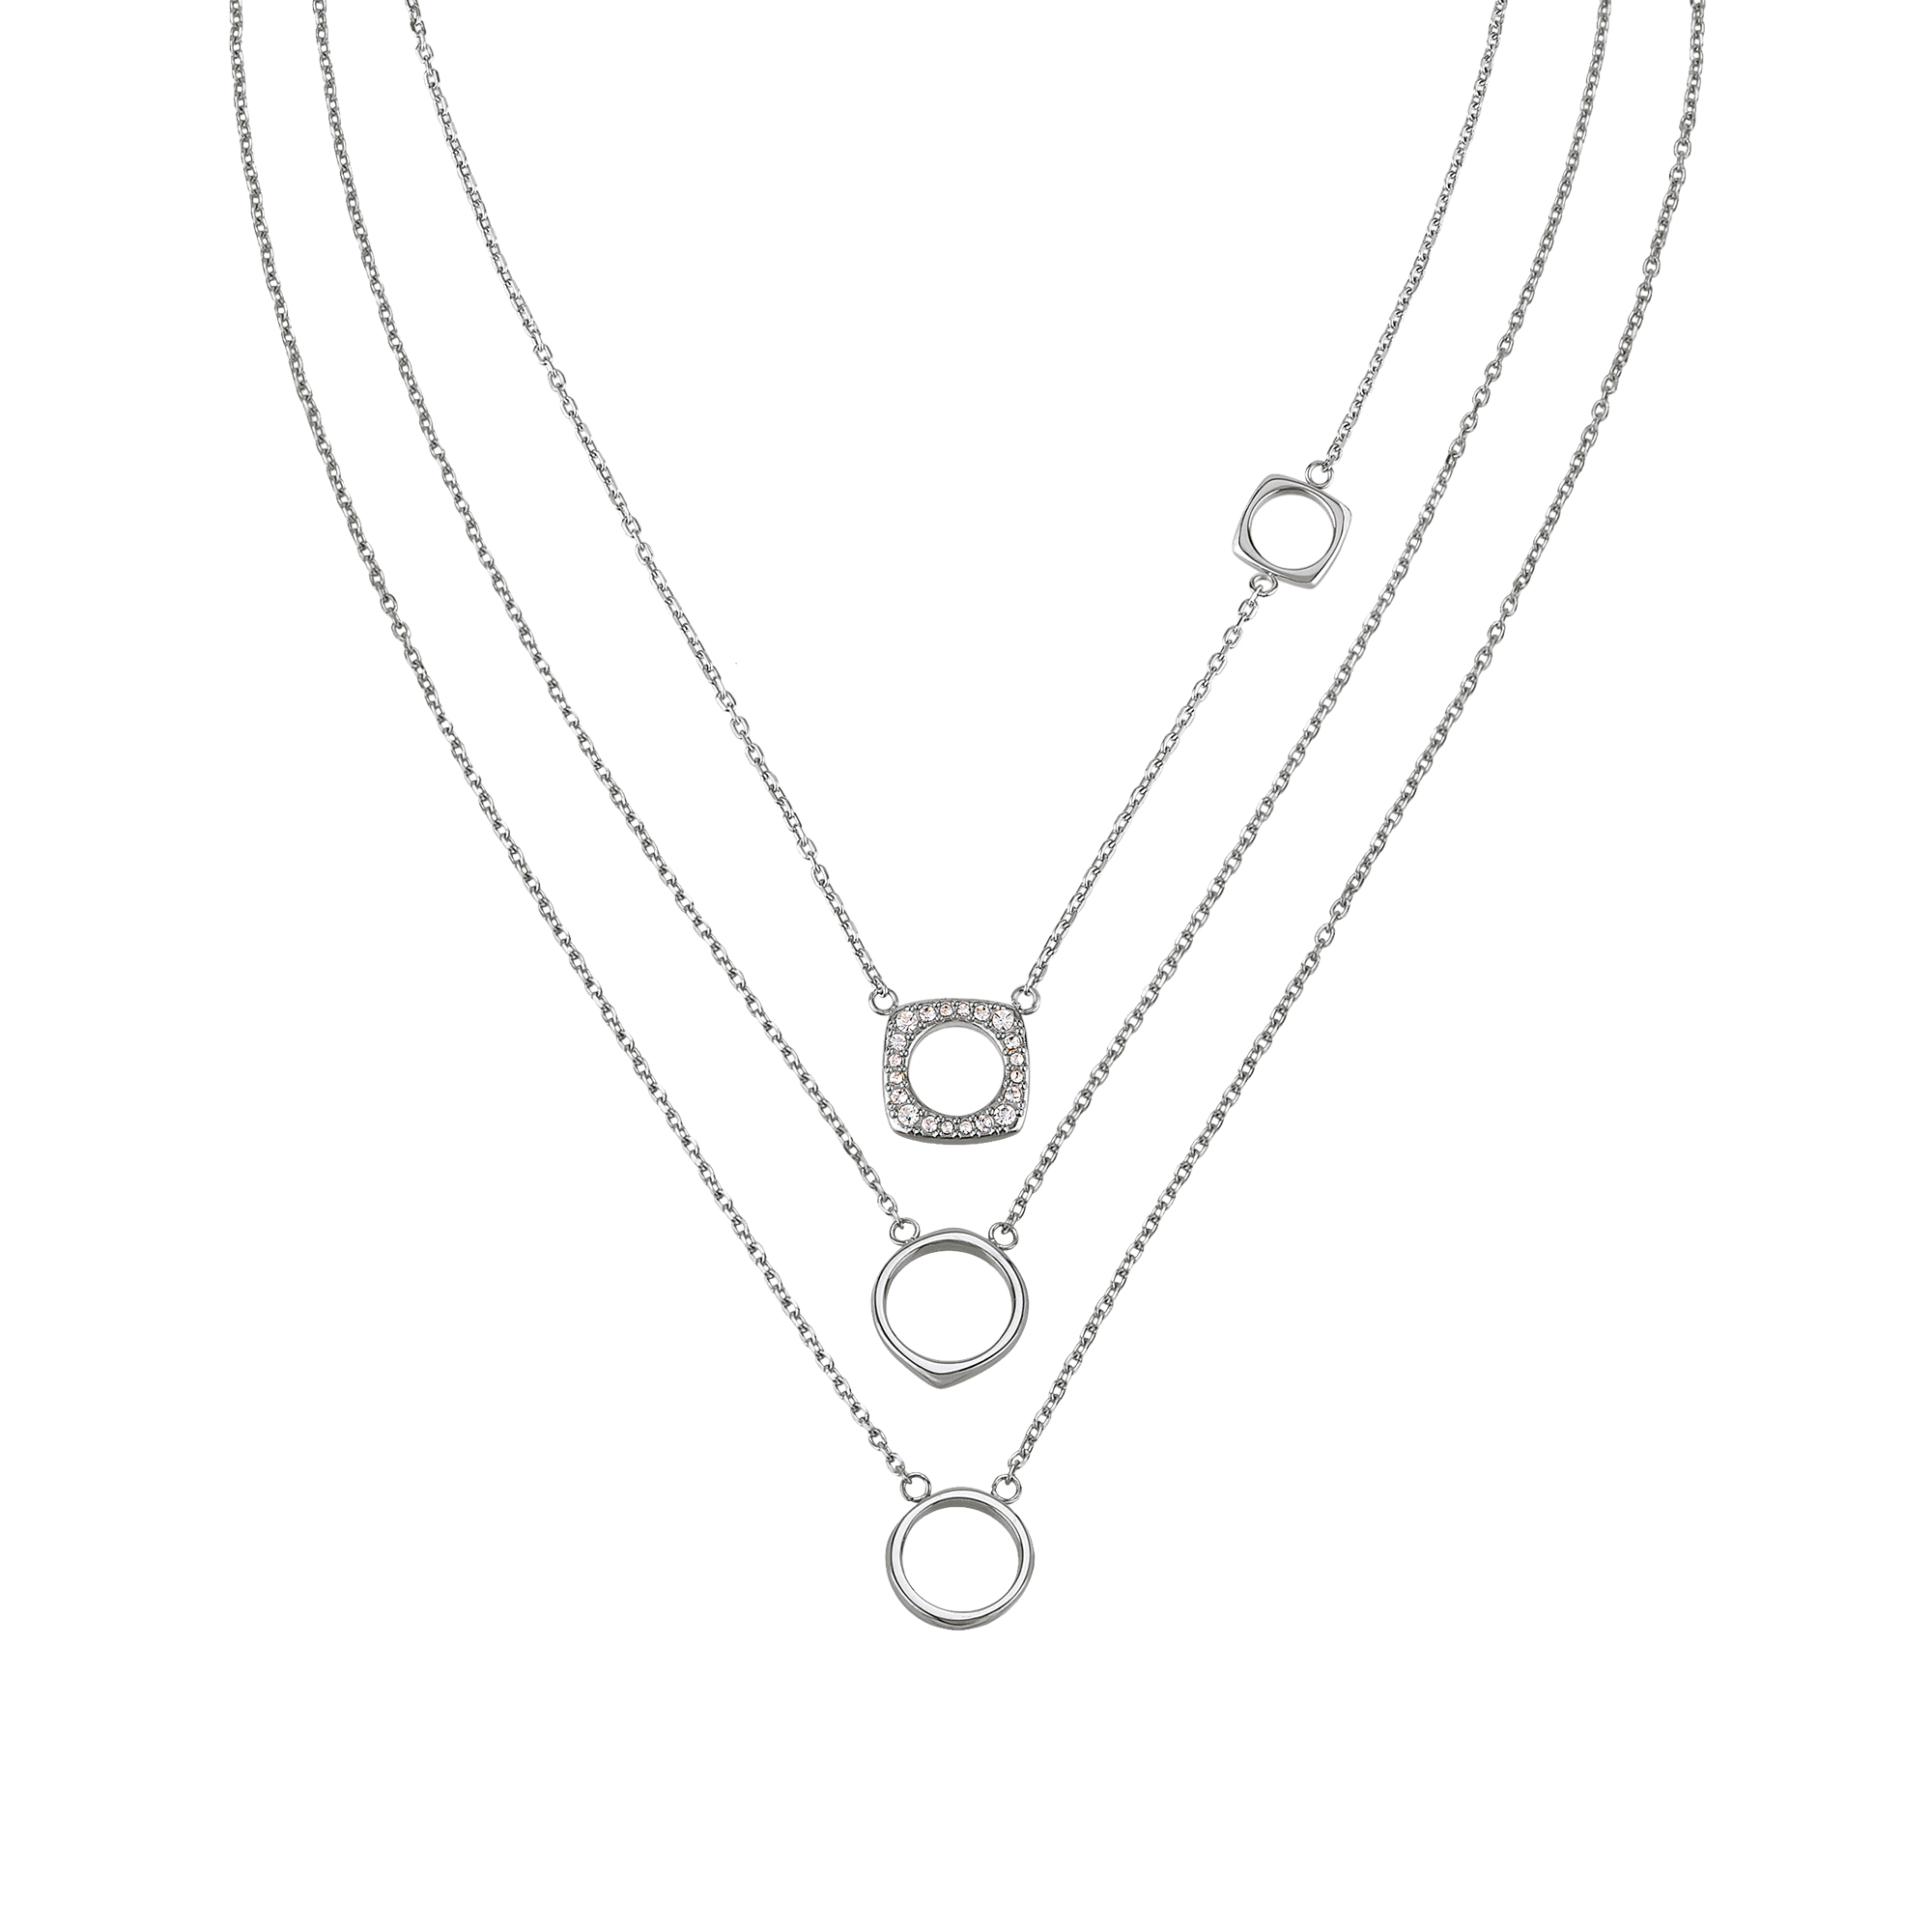 NEW TETRA - SET OF 2 STAINLESS STEEL NECKLACES - 4 - TJ3169 | Breil